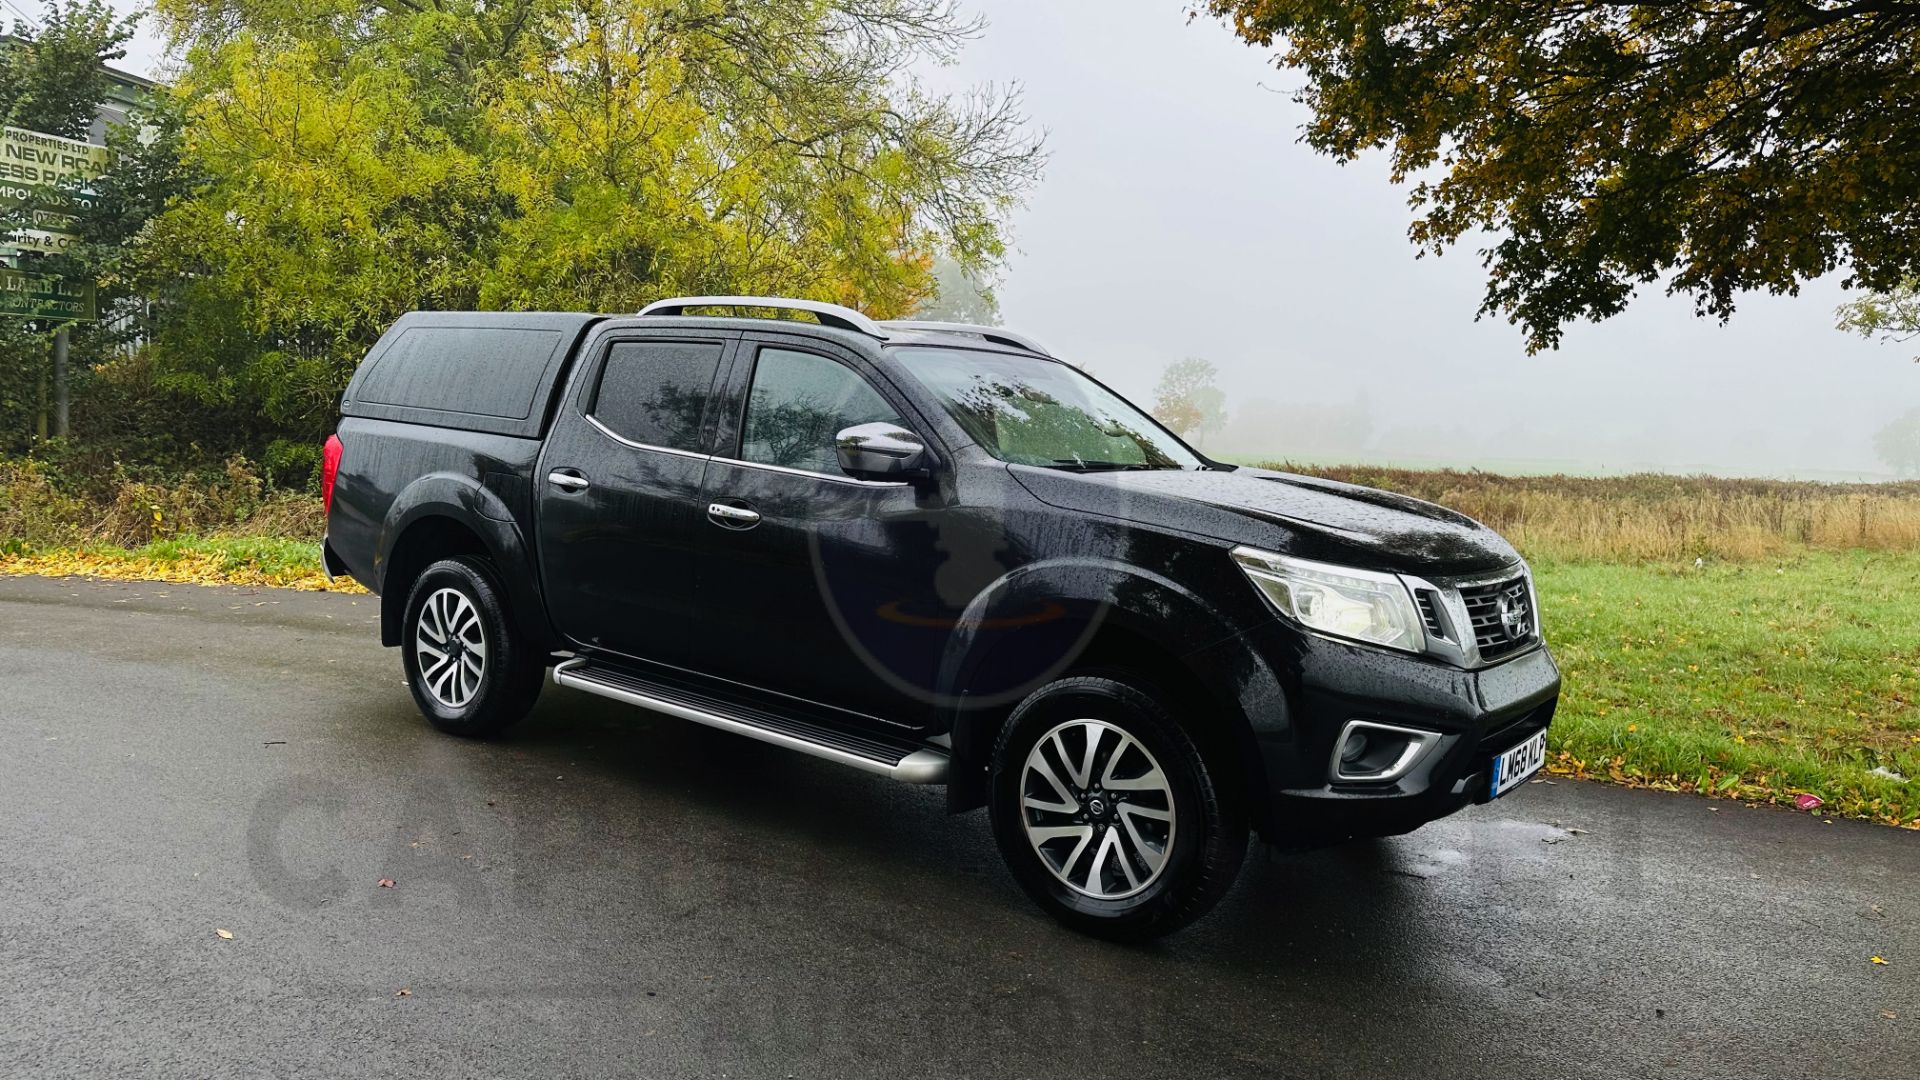 NISSAN NAVARA *TEKNA EDITION* DOUBLE CAB PICK-UP (2019 - EURO 6) 2.3 DCI - STOP/START (1 OWNER) - Image 2 of 48